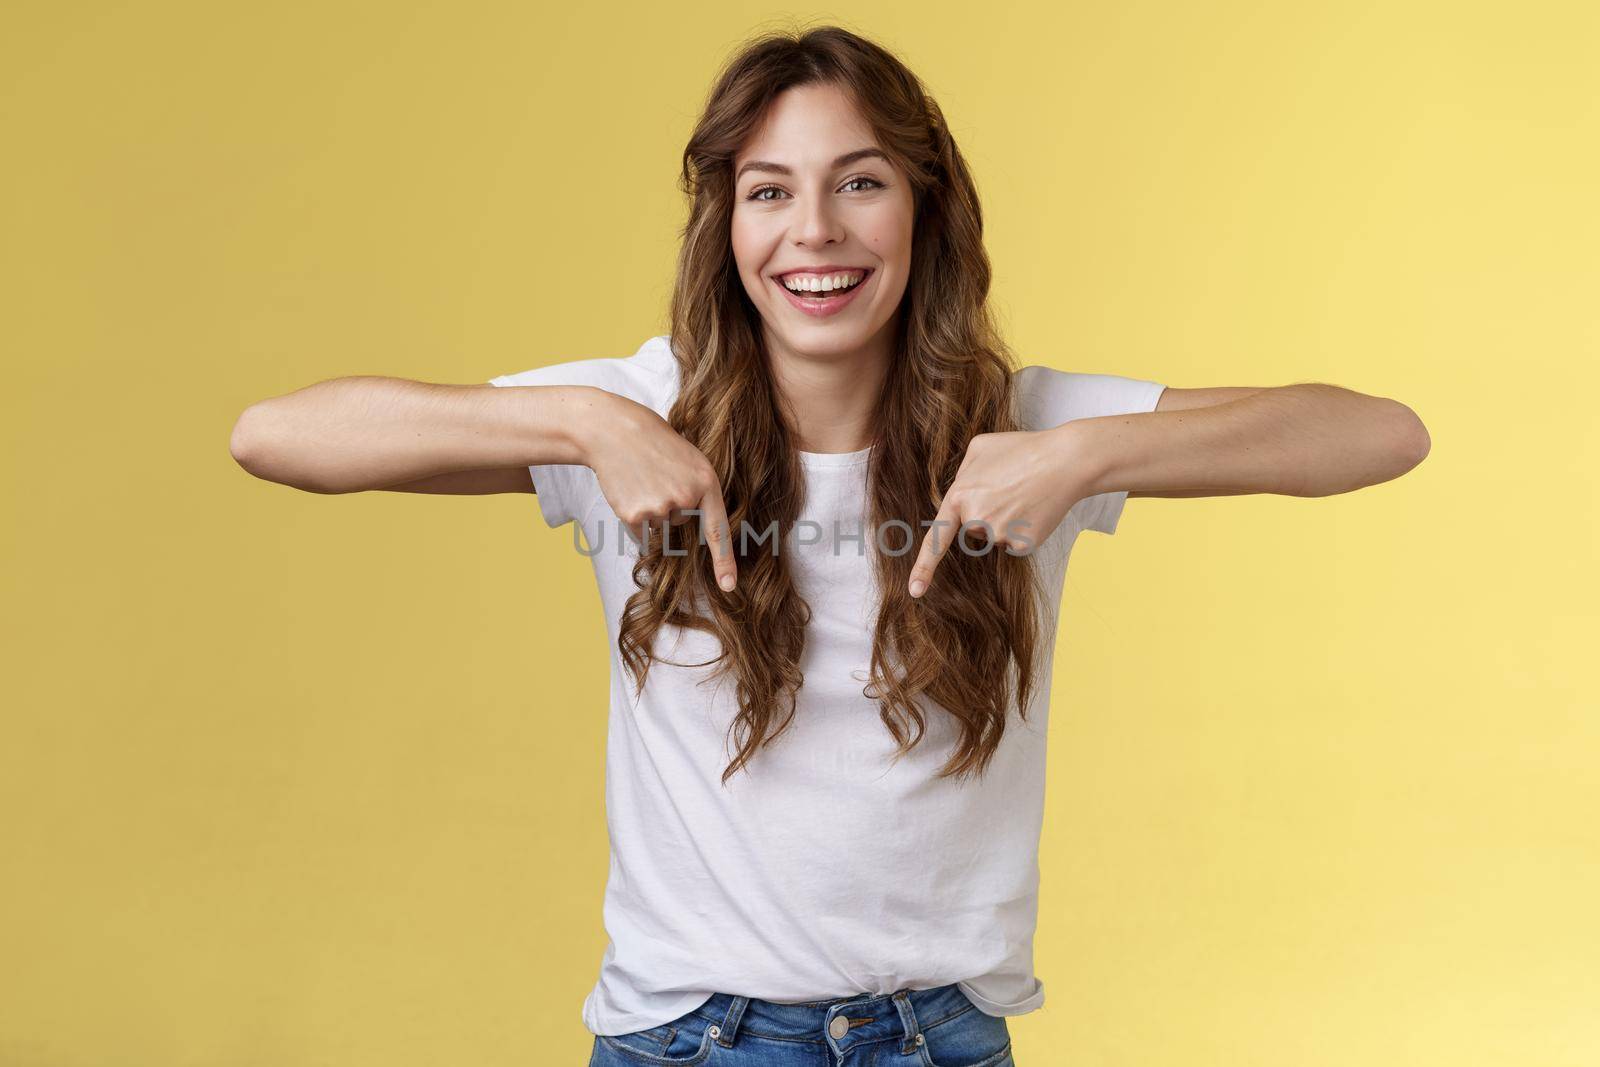 Cheerful lively happy funny girl long beautiful hair pointing down index fingers indicate bottom promo laughing joyfully share positive emotions recommend product advertising yellow background.